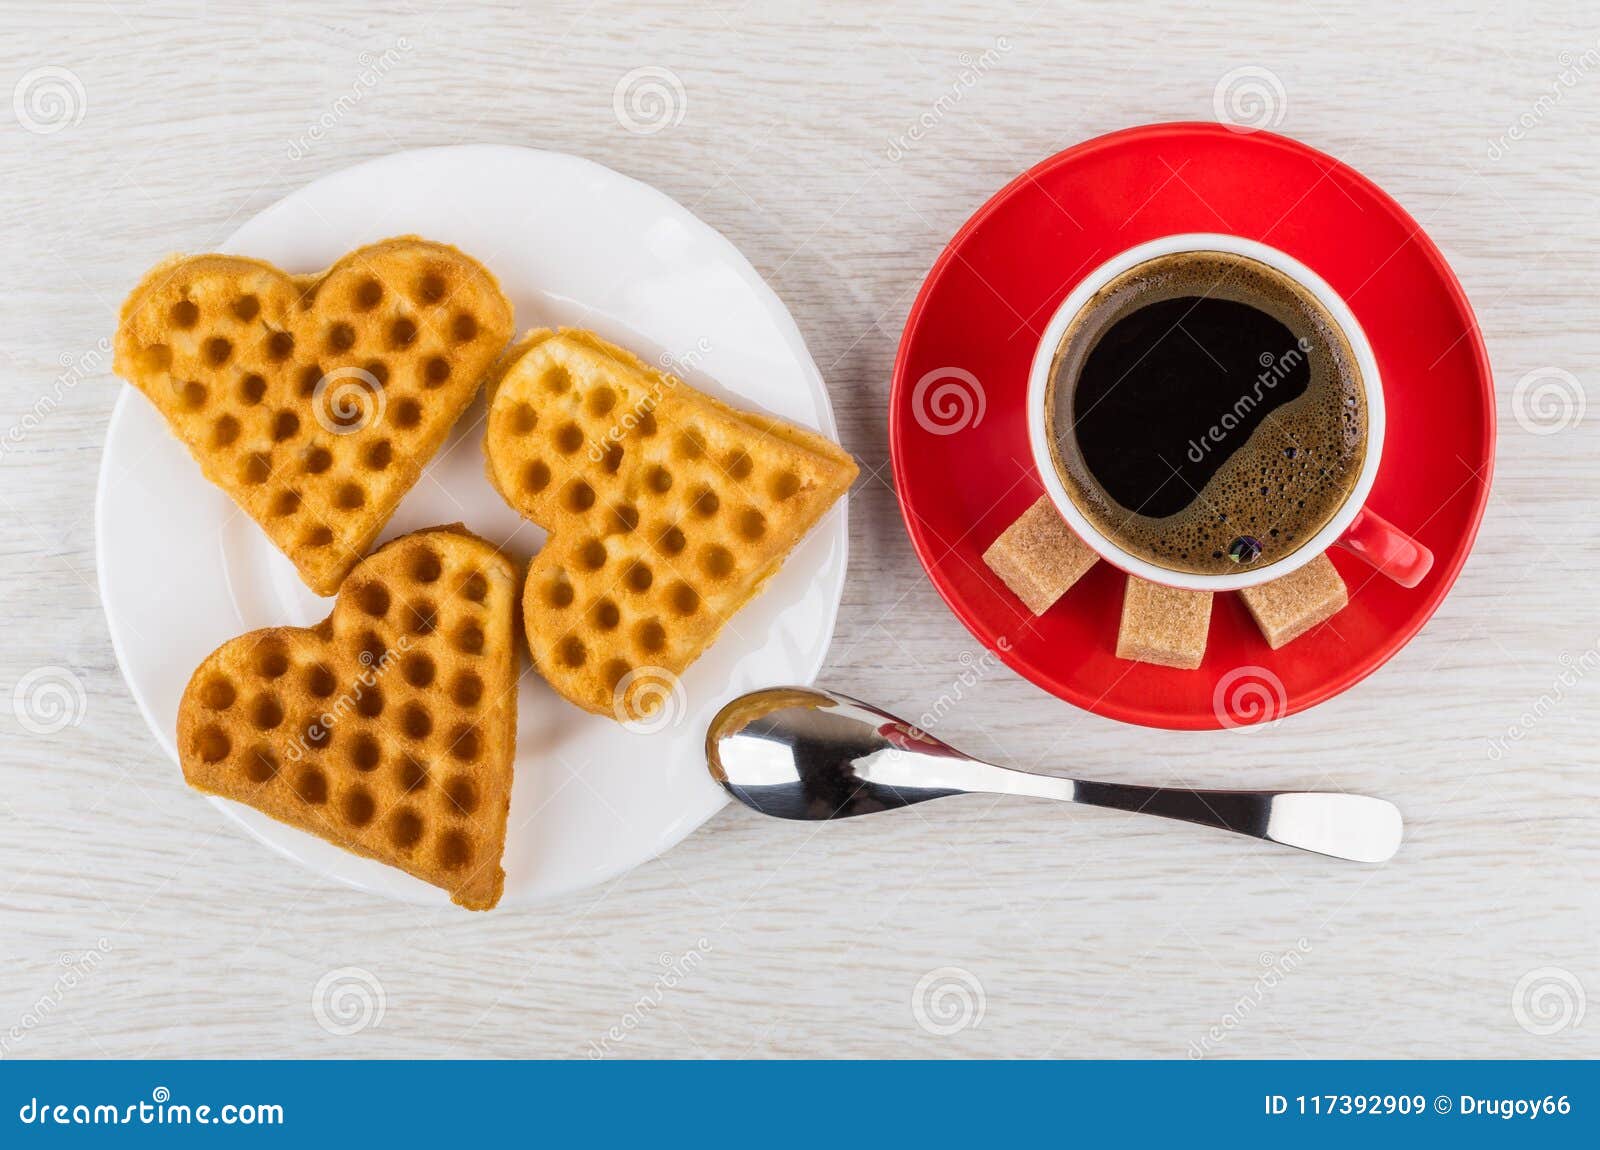 Cookies in Plate, Coffee in Cup, Sugar, Spoon on Table Stock Image ...